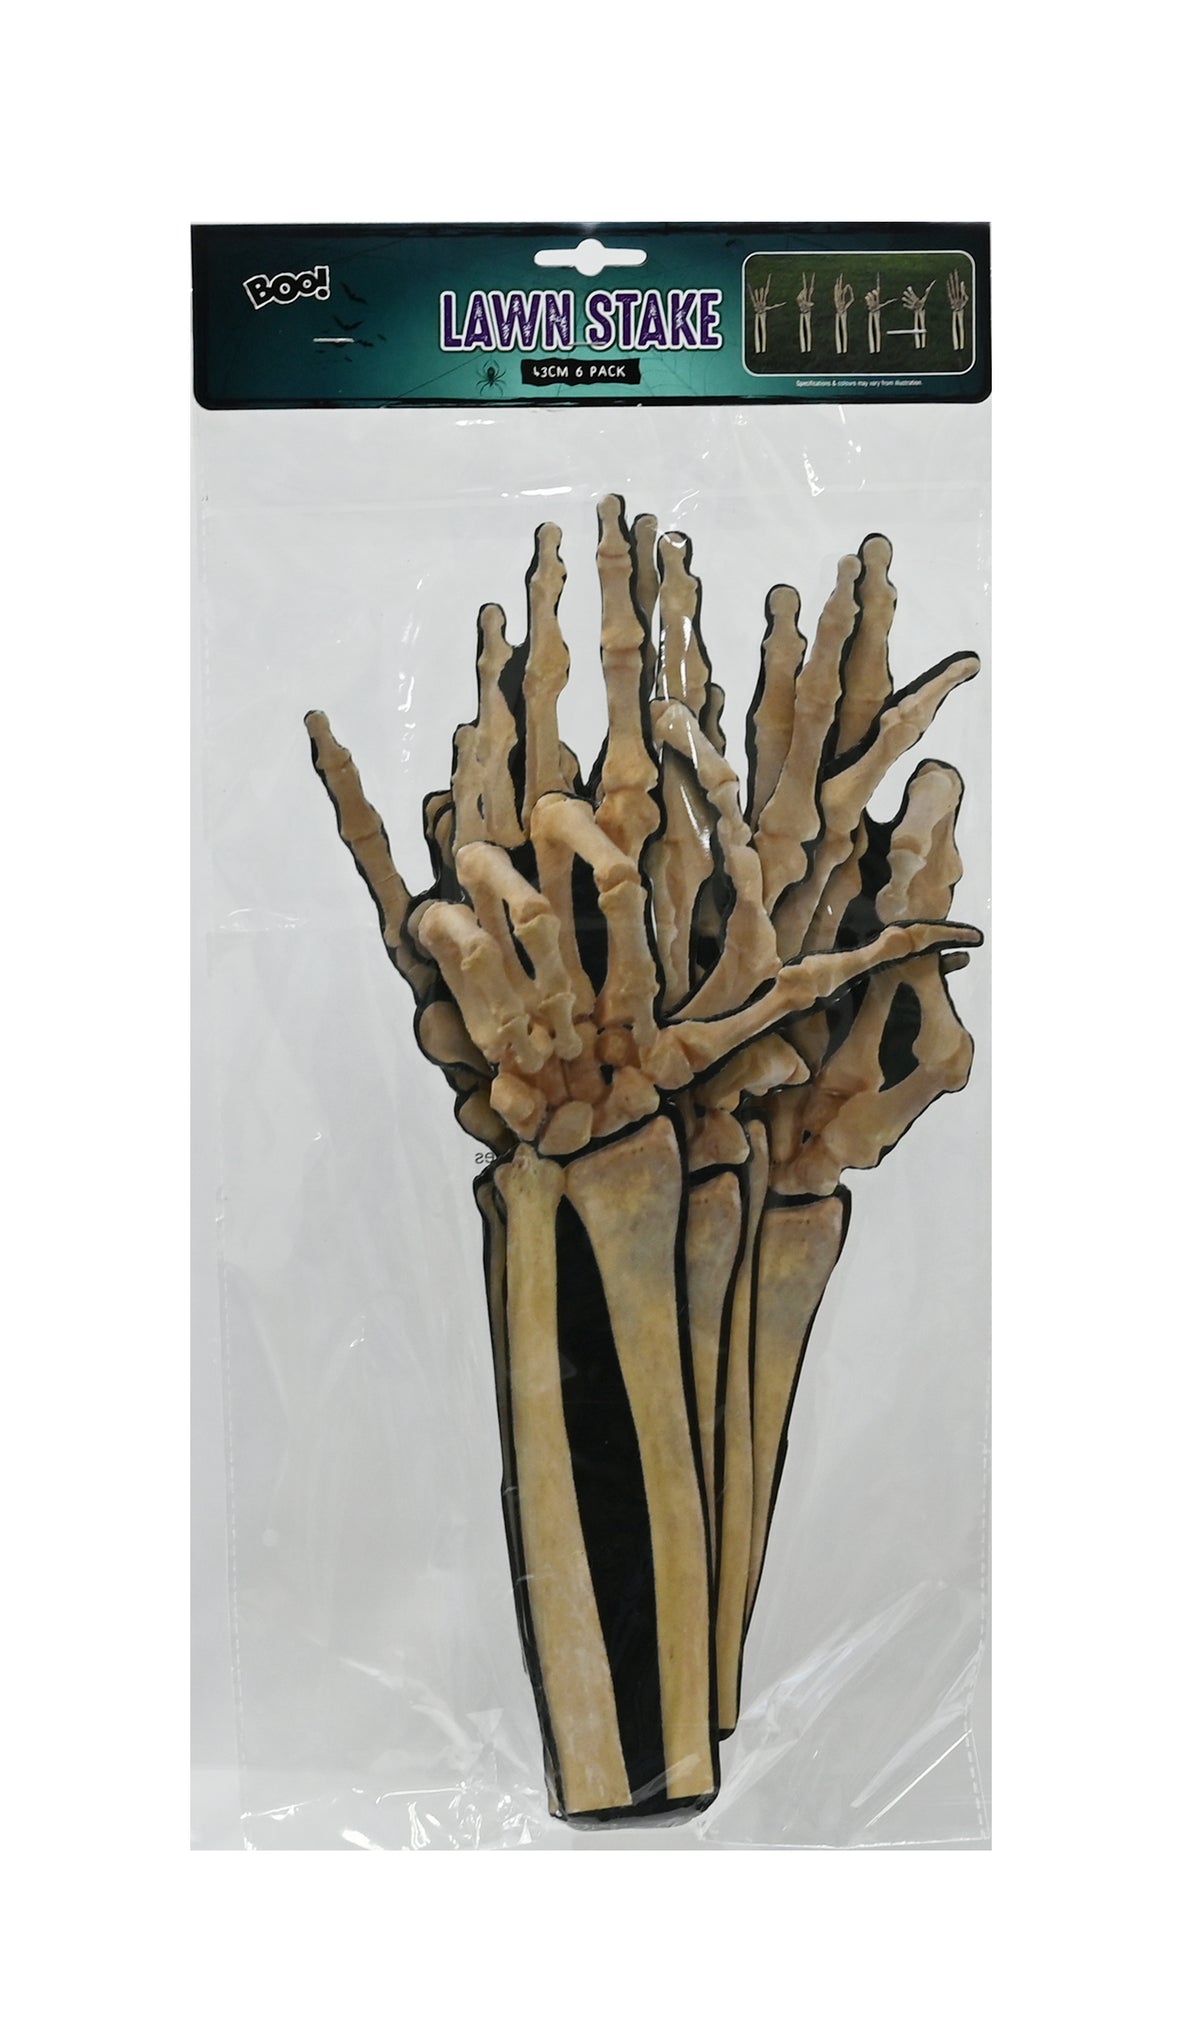 Boo! Skeleton Hands Lawn Stake | Pack of 6